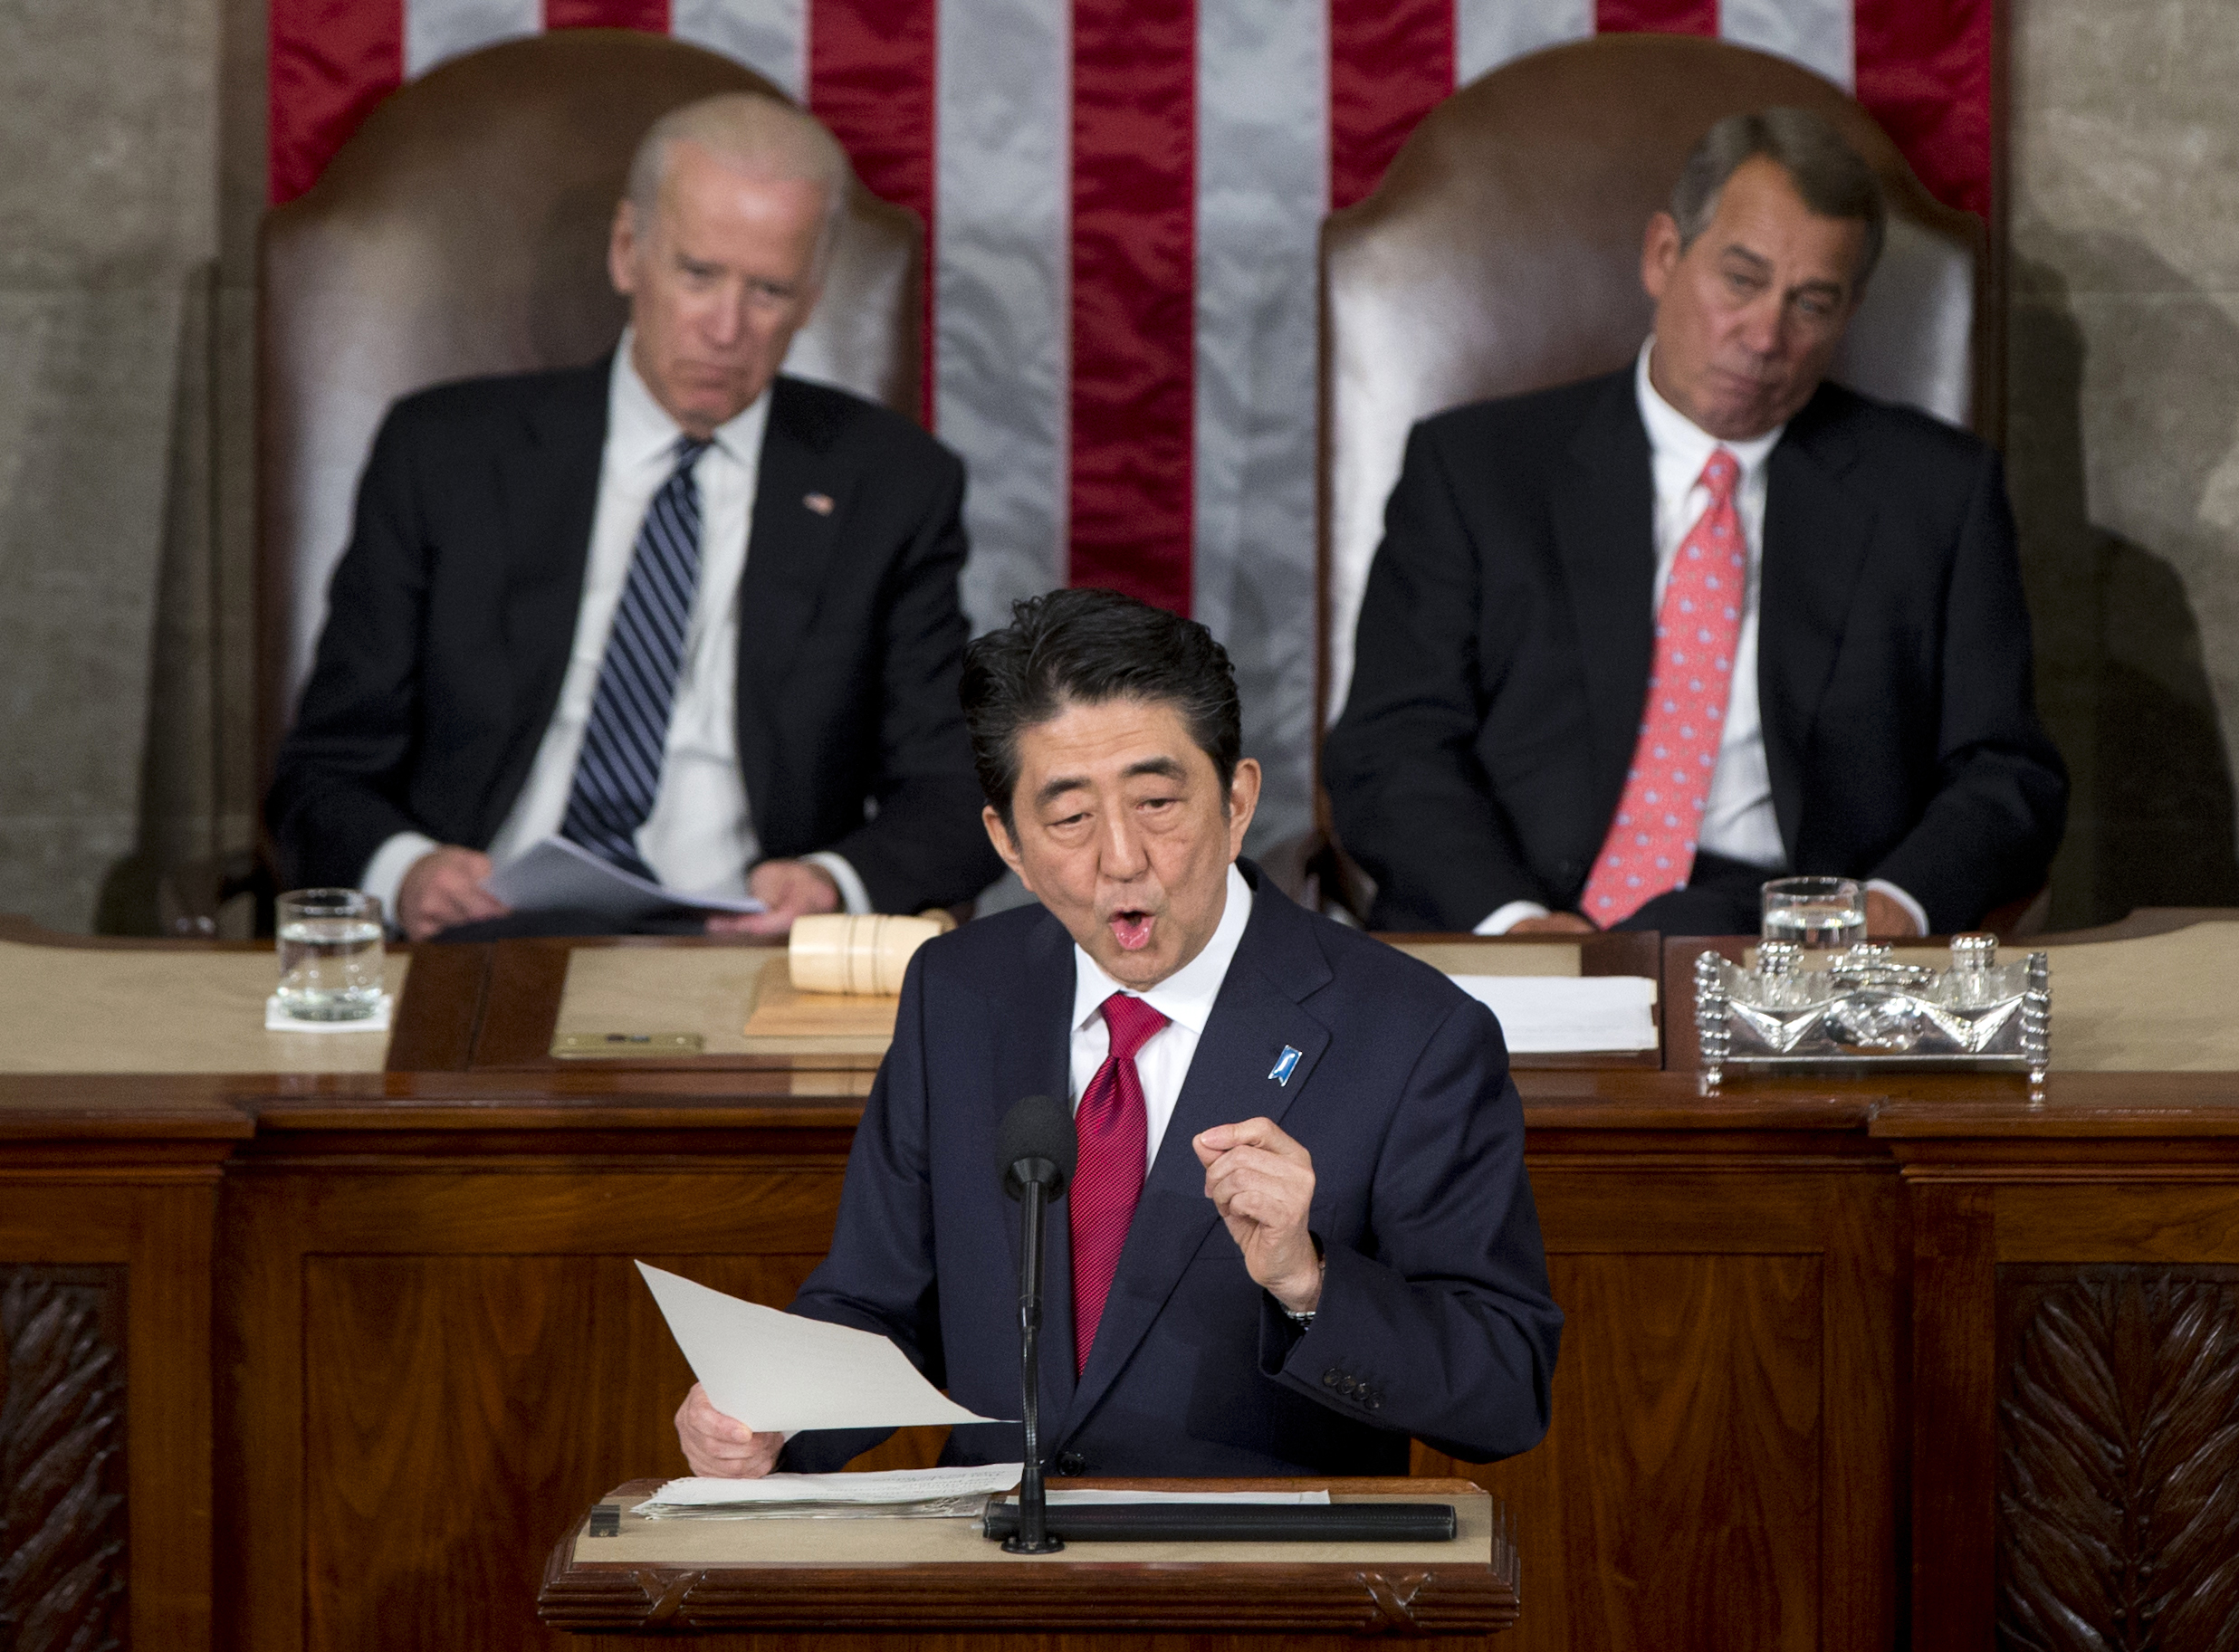 Japanese Prime Minister Shinzo Abe speaks before a joint meeting of Congress, April 29, 2015, on Capitol Hill in Washington. (Carolyn Kaster—AP)